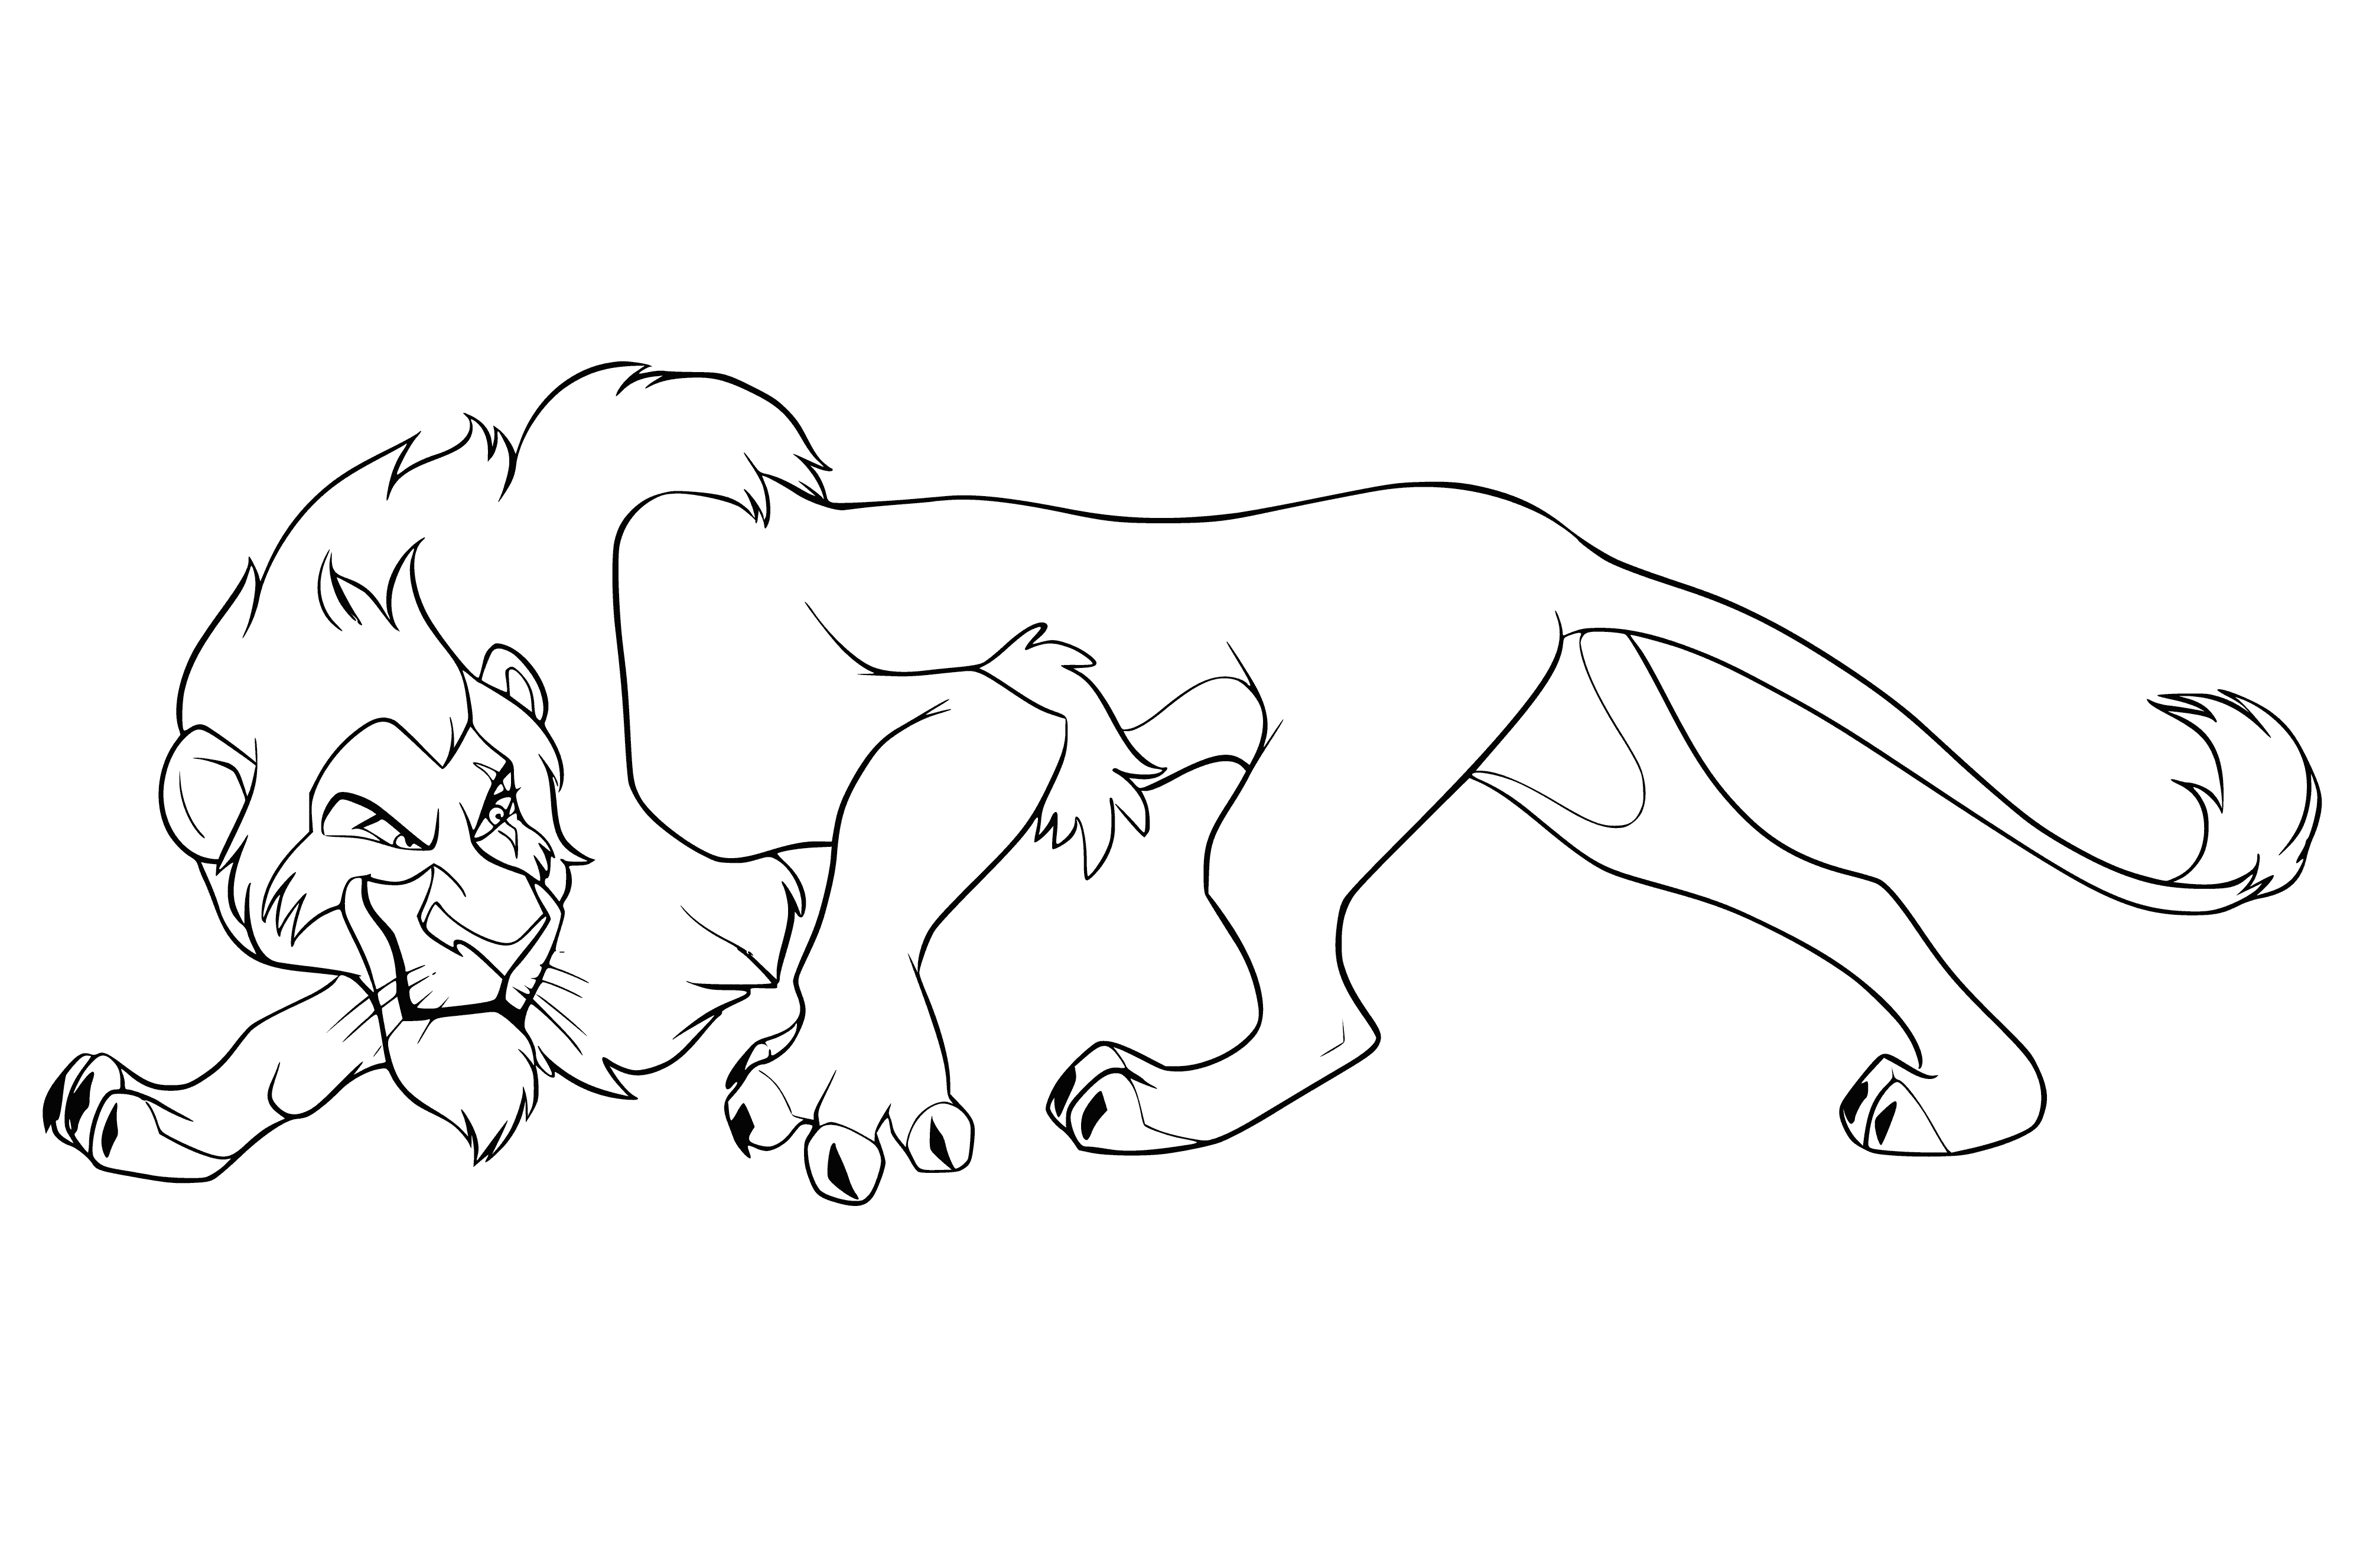 coloring page: Scar is the former king of Pride Rock & jealous uncle of Simba. He's a large lion with a scar on his eye - hence the name.